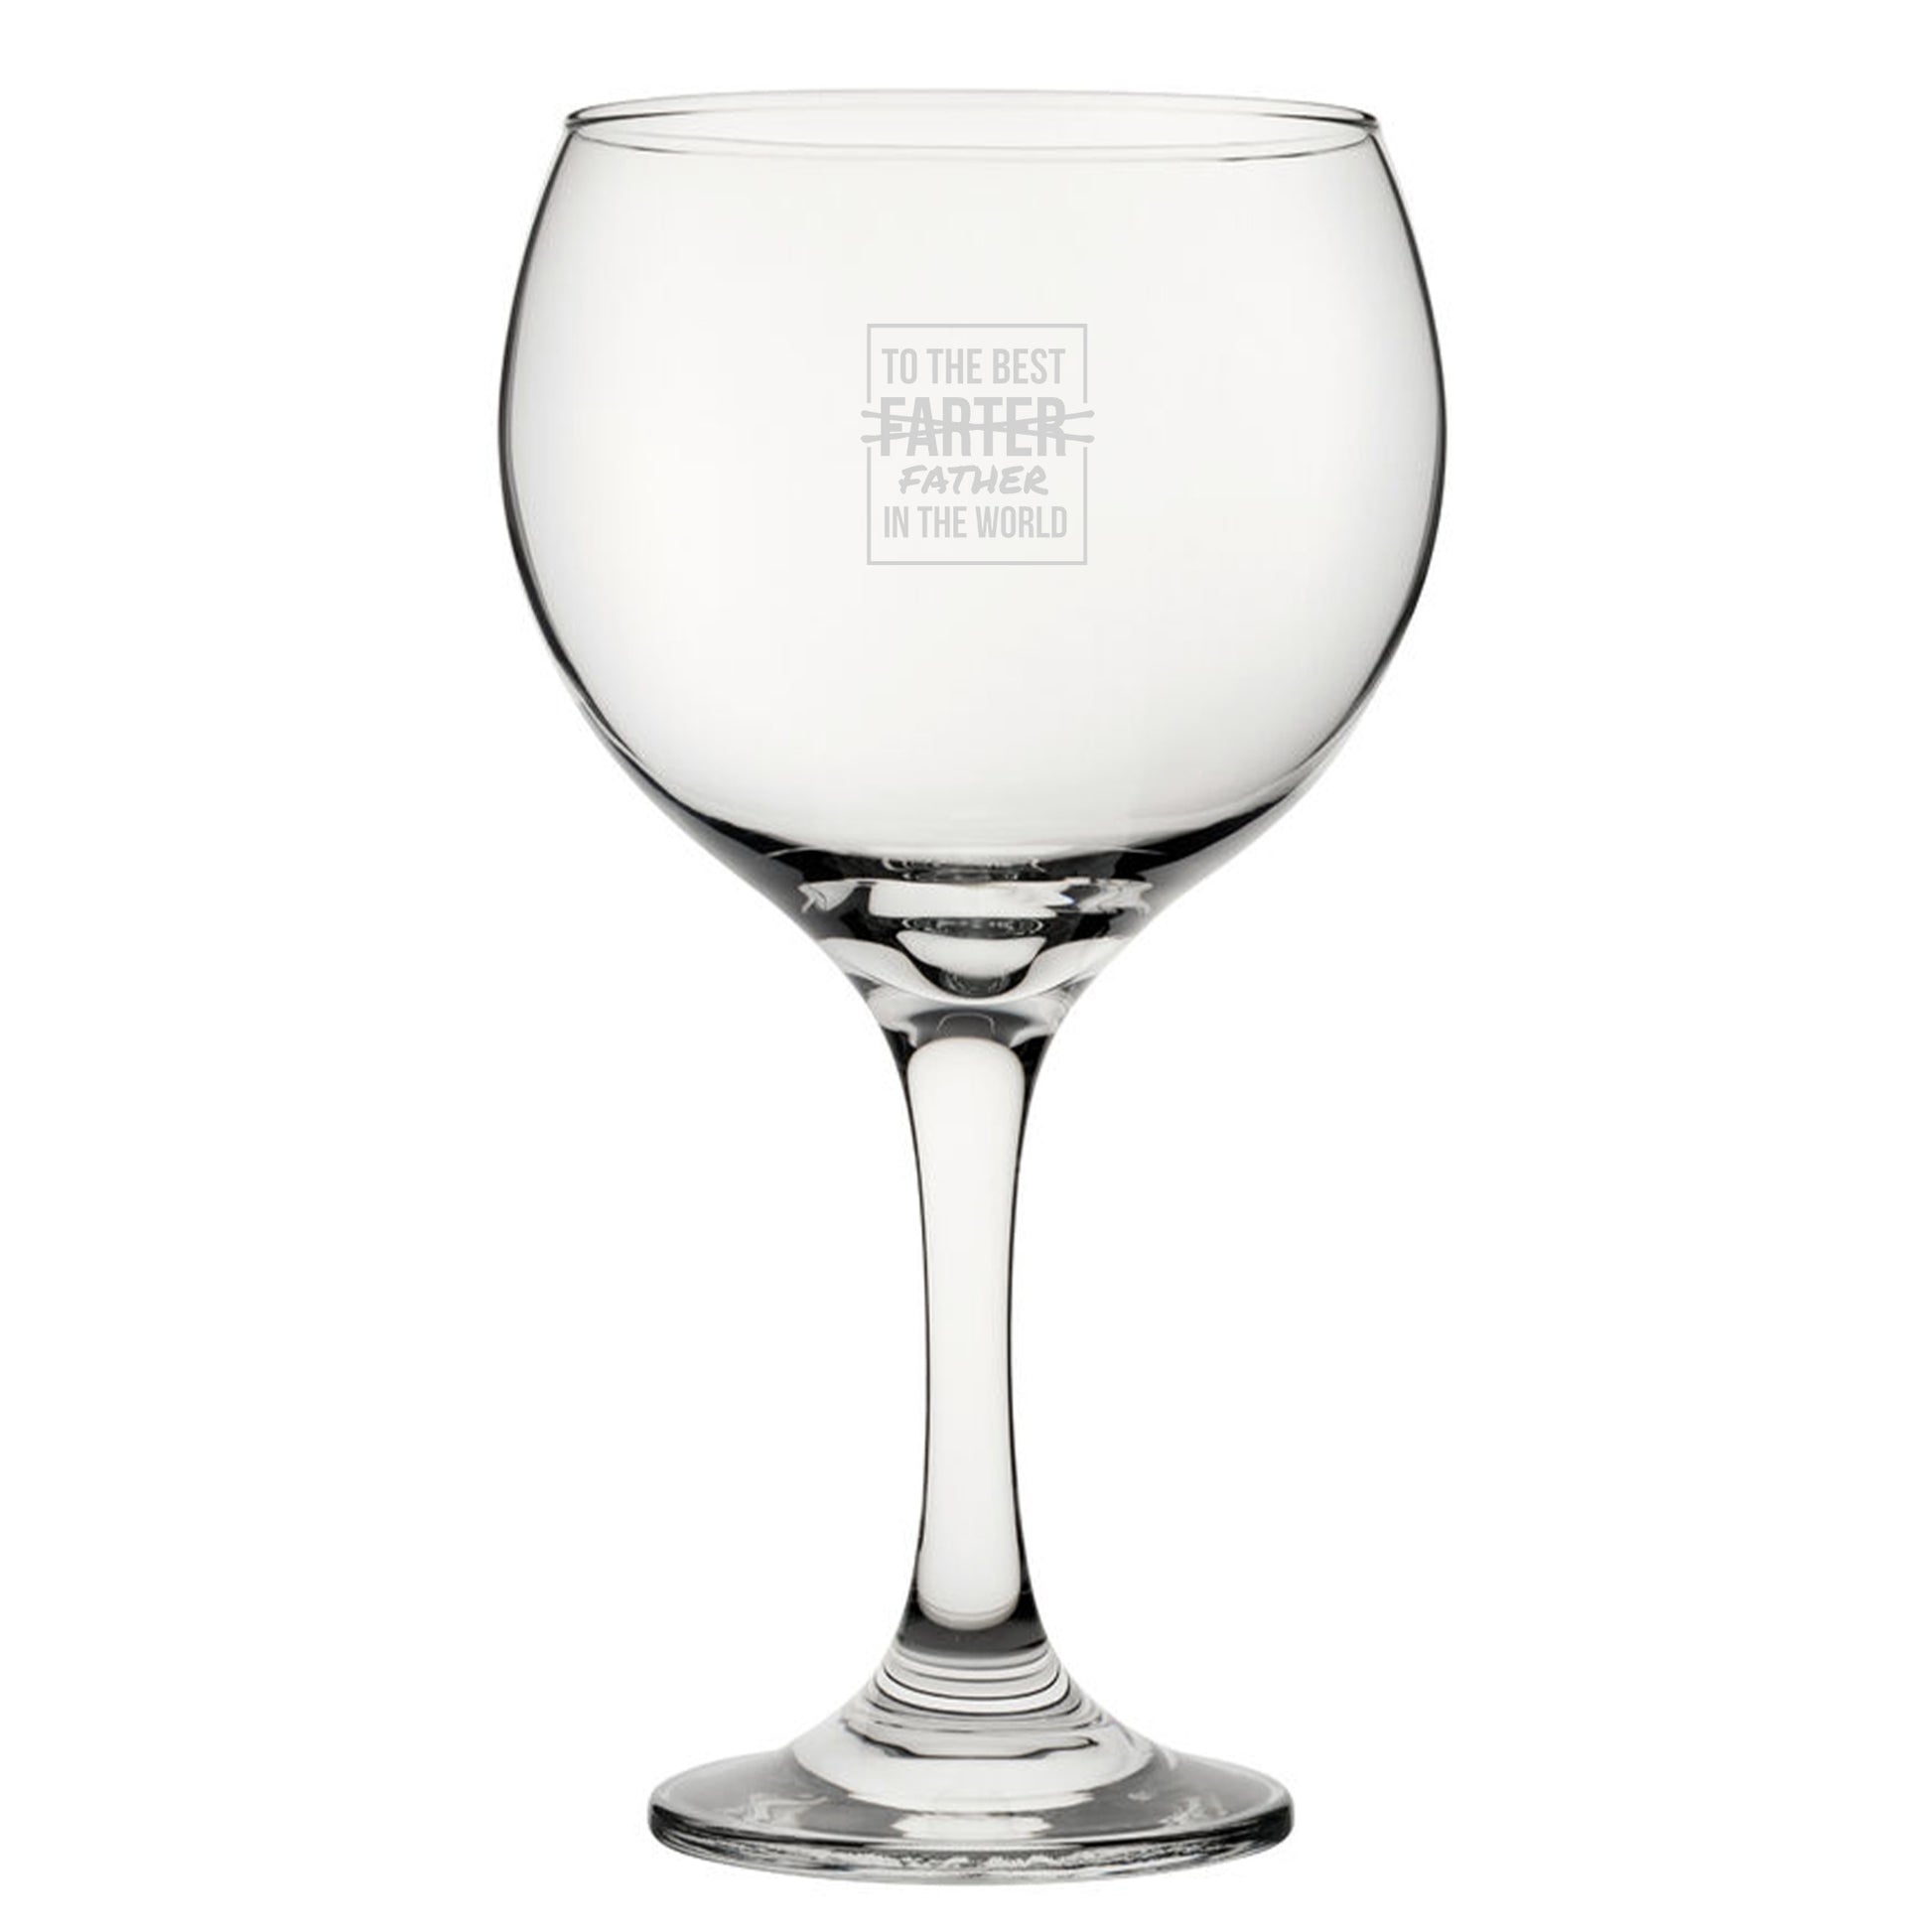 To The Best Farter In The World - Engraved Novelty Gin Balloon Cocktail Glass Image 2